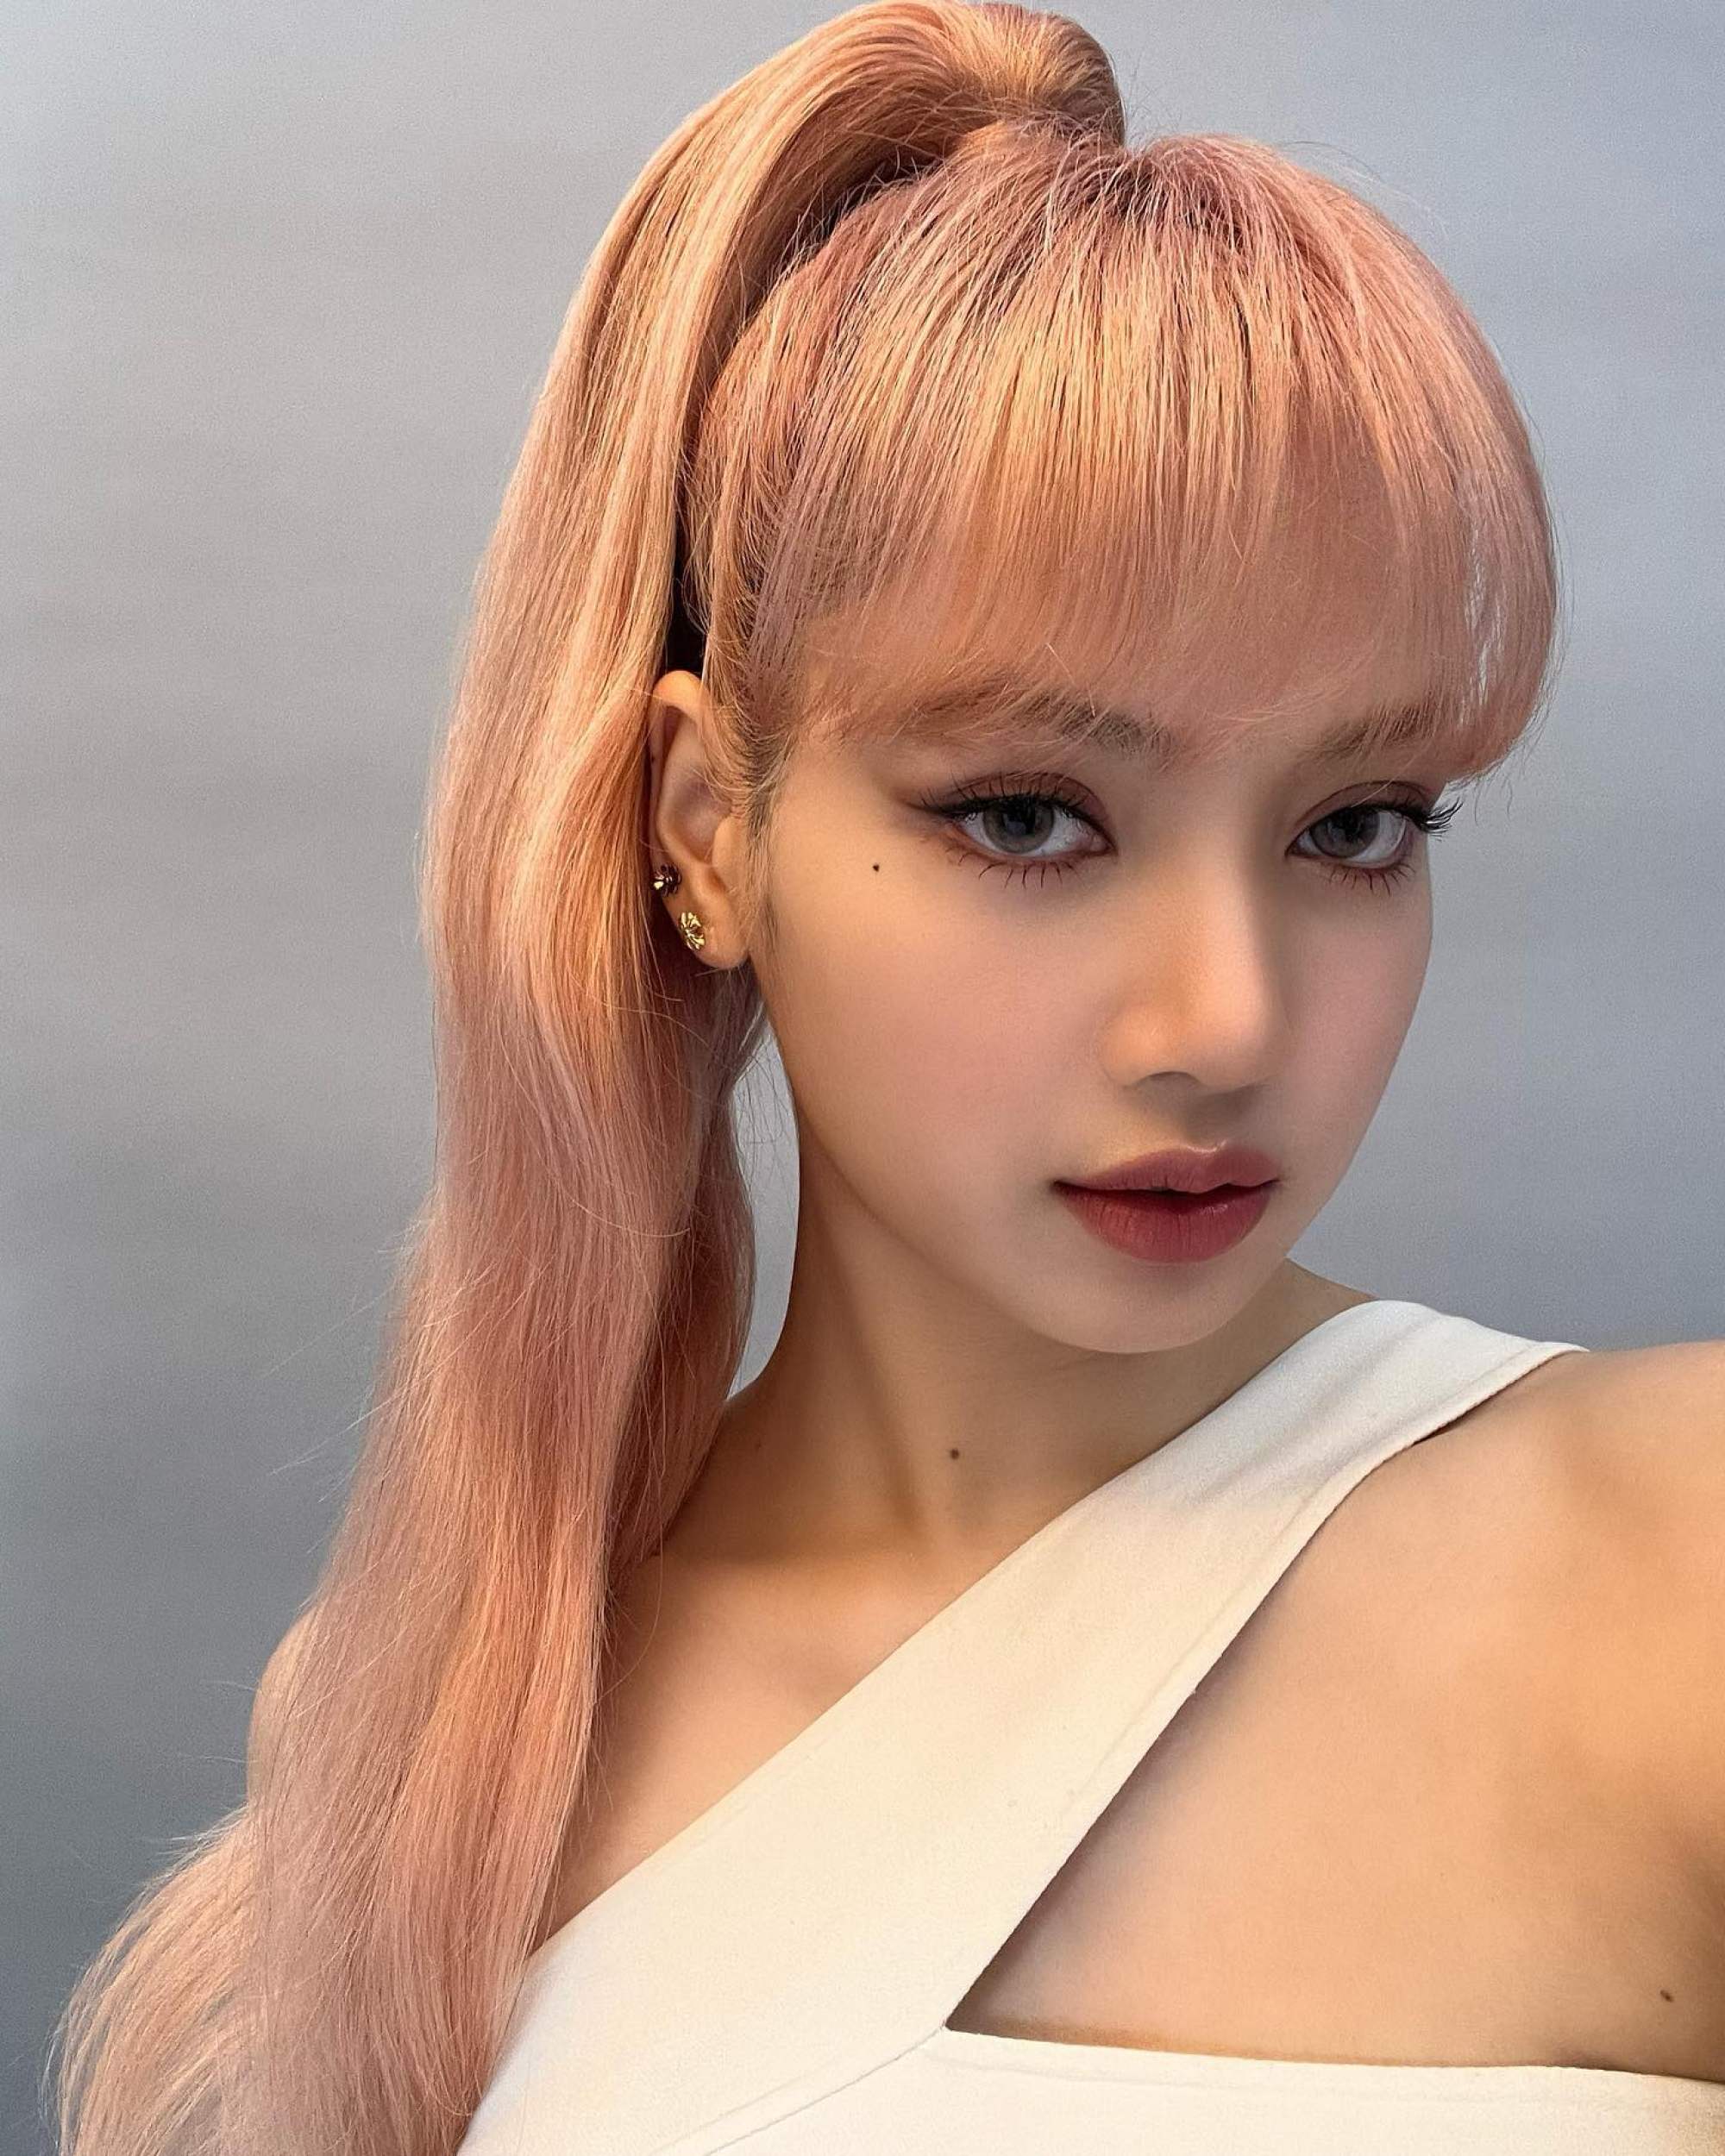 theqoo] BLACKPINK LISA, DATING LOUIS VUITTON GROUP'S 2ND